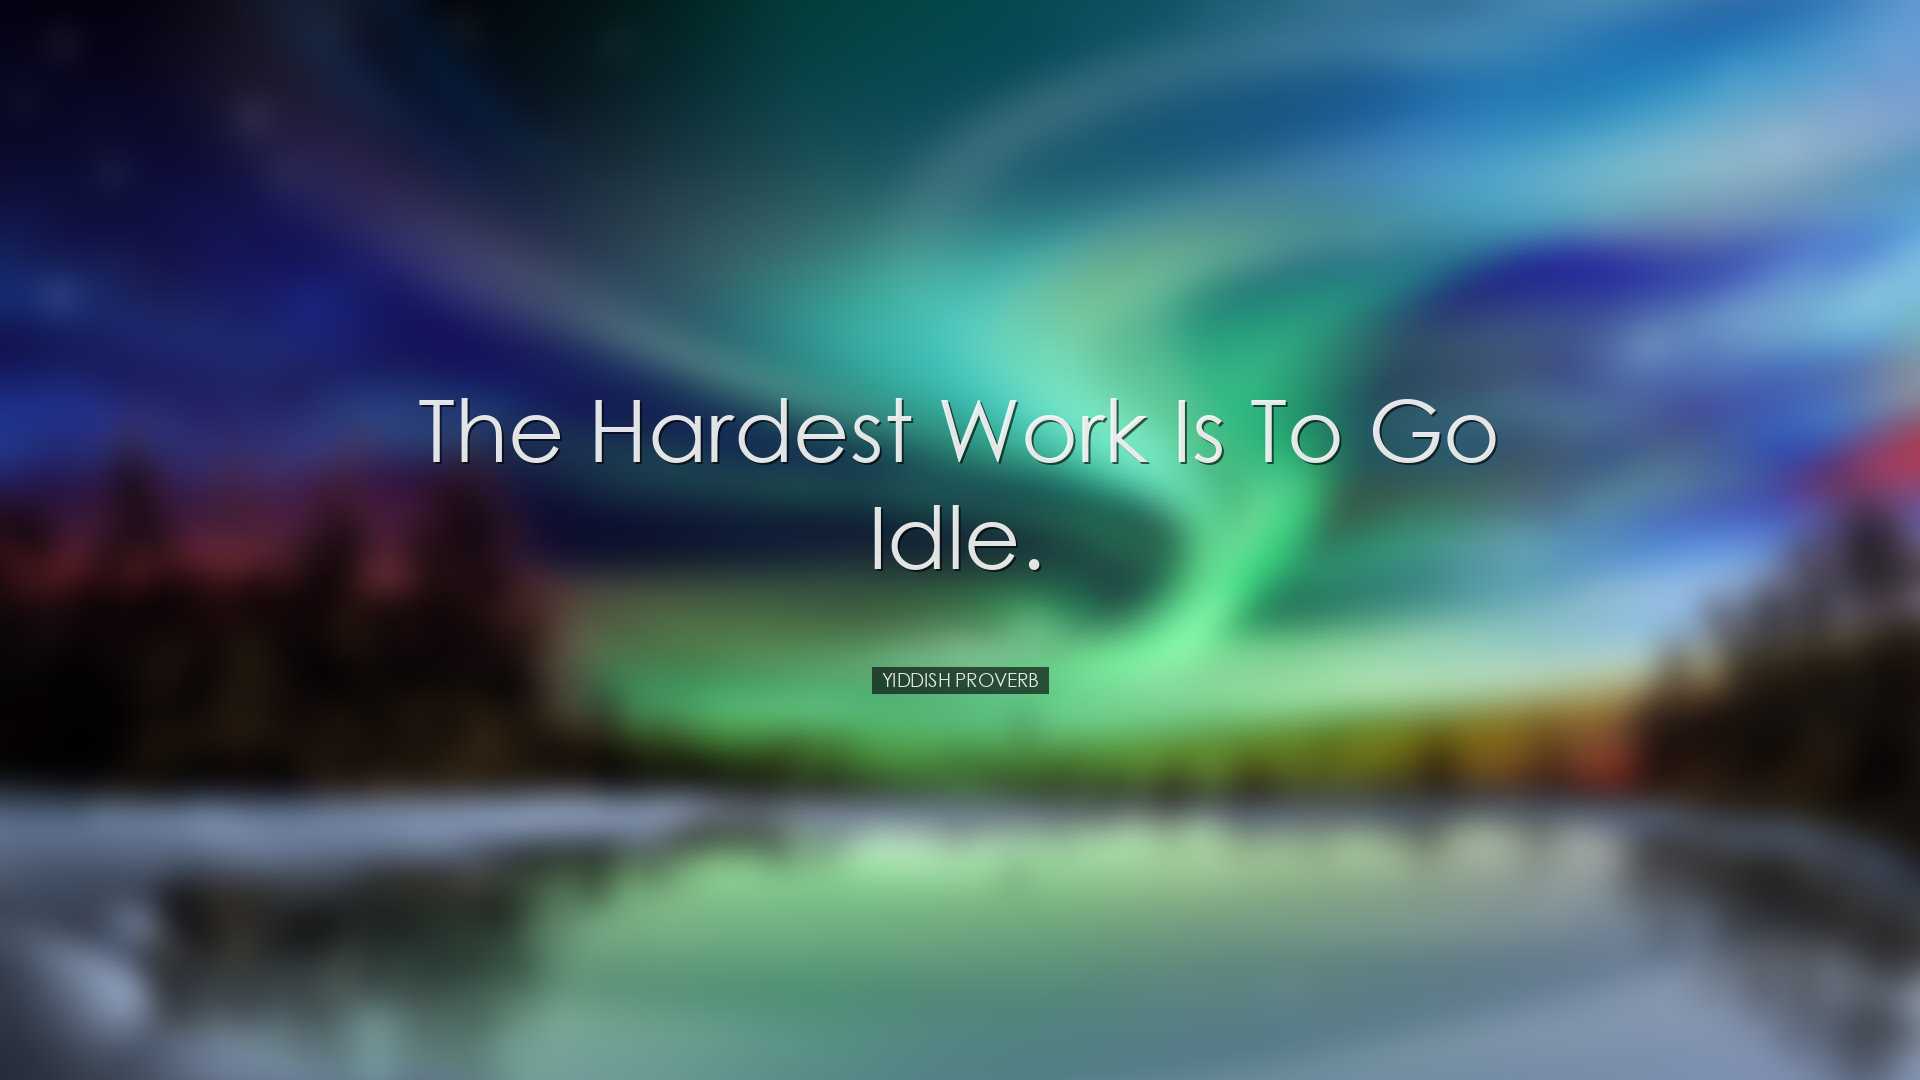 The hardest work is to go idle. - Yiddish Proverb